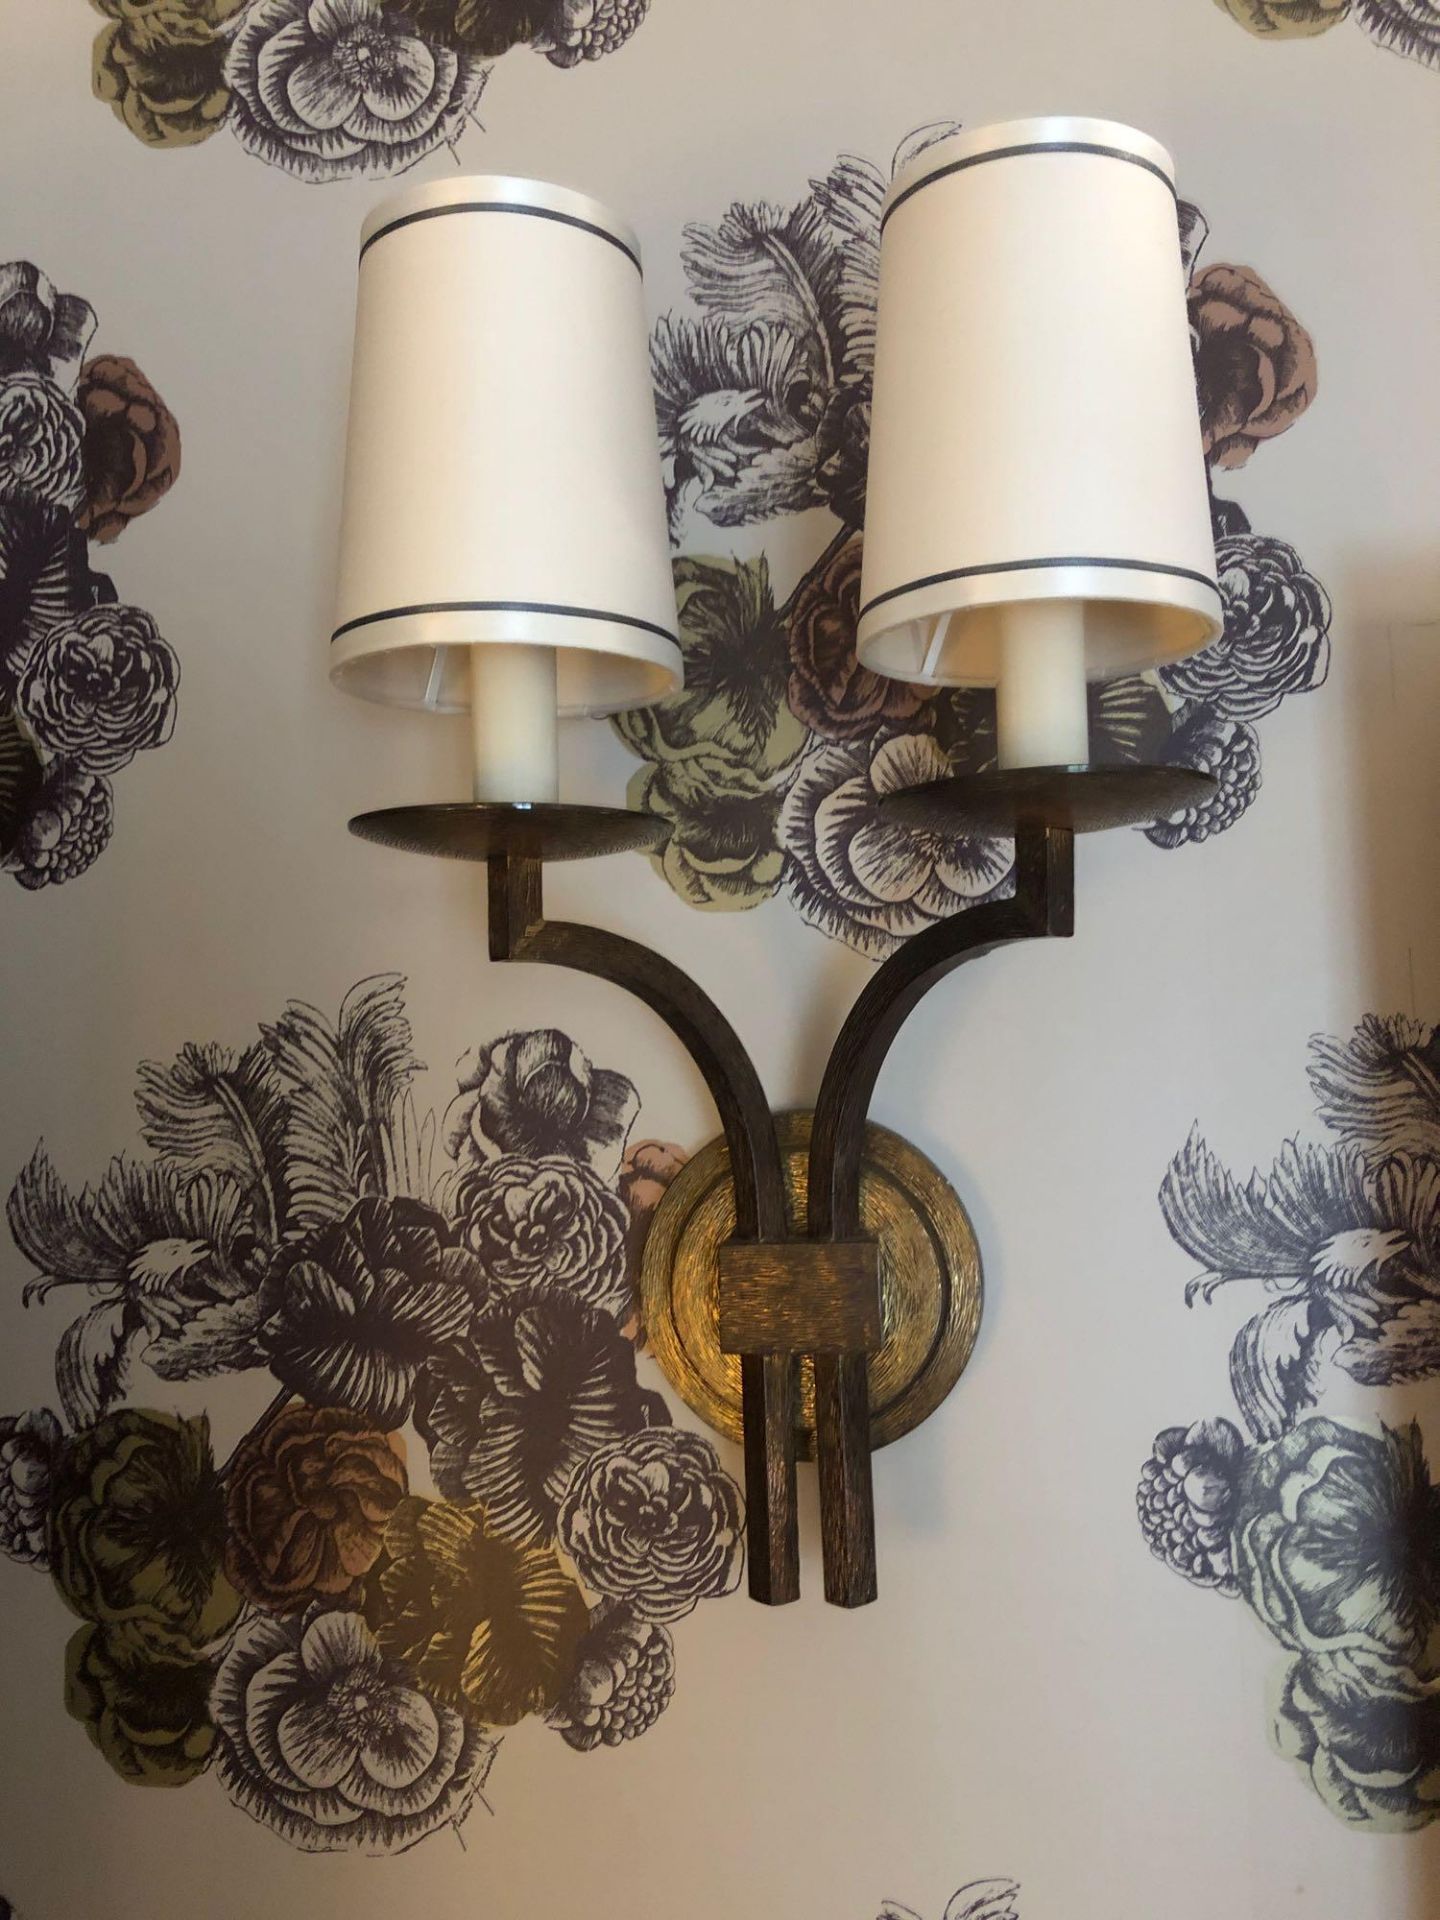 A Pair Of Dernier And Hamlyn Twin Arm Antique Bronzed Wall Sconces With Shade 51cm (Room 512) - Bild 2 aus 2